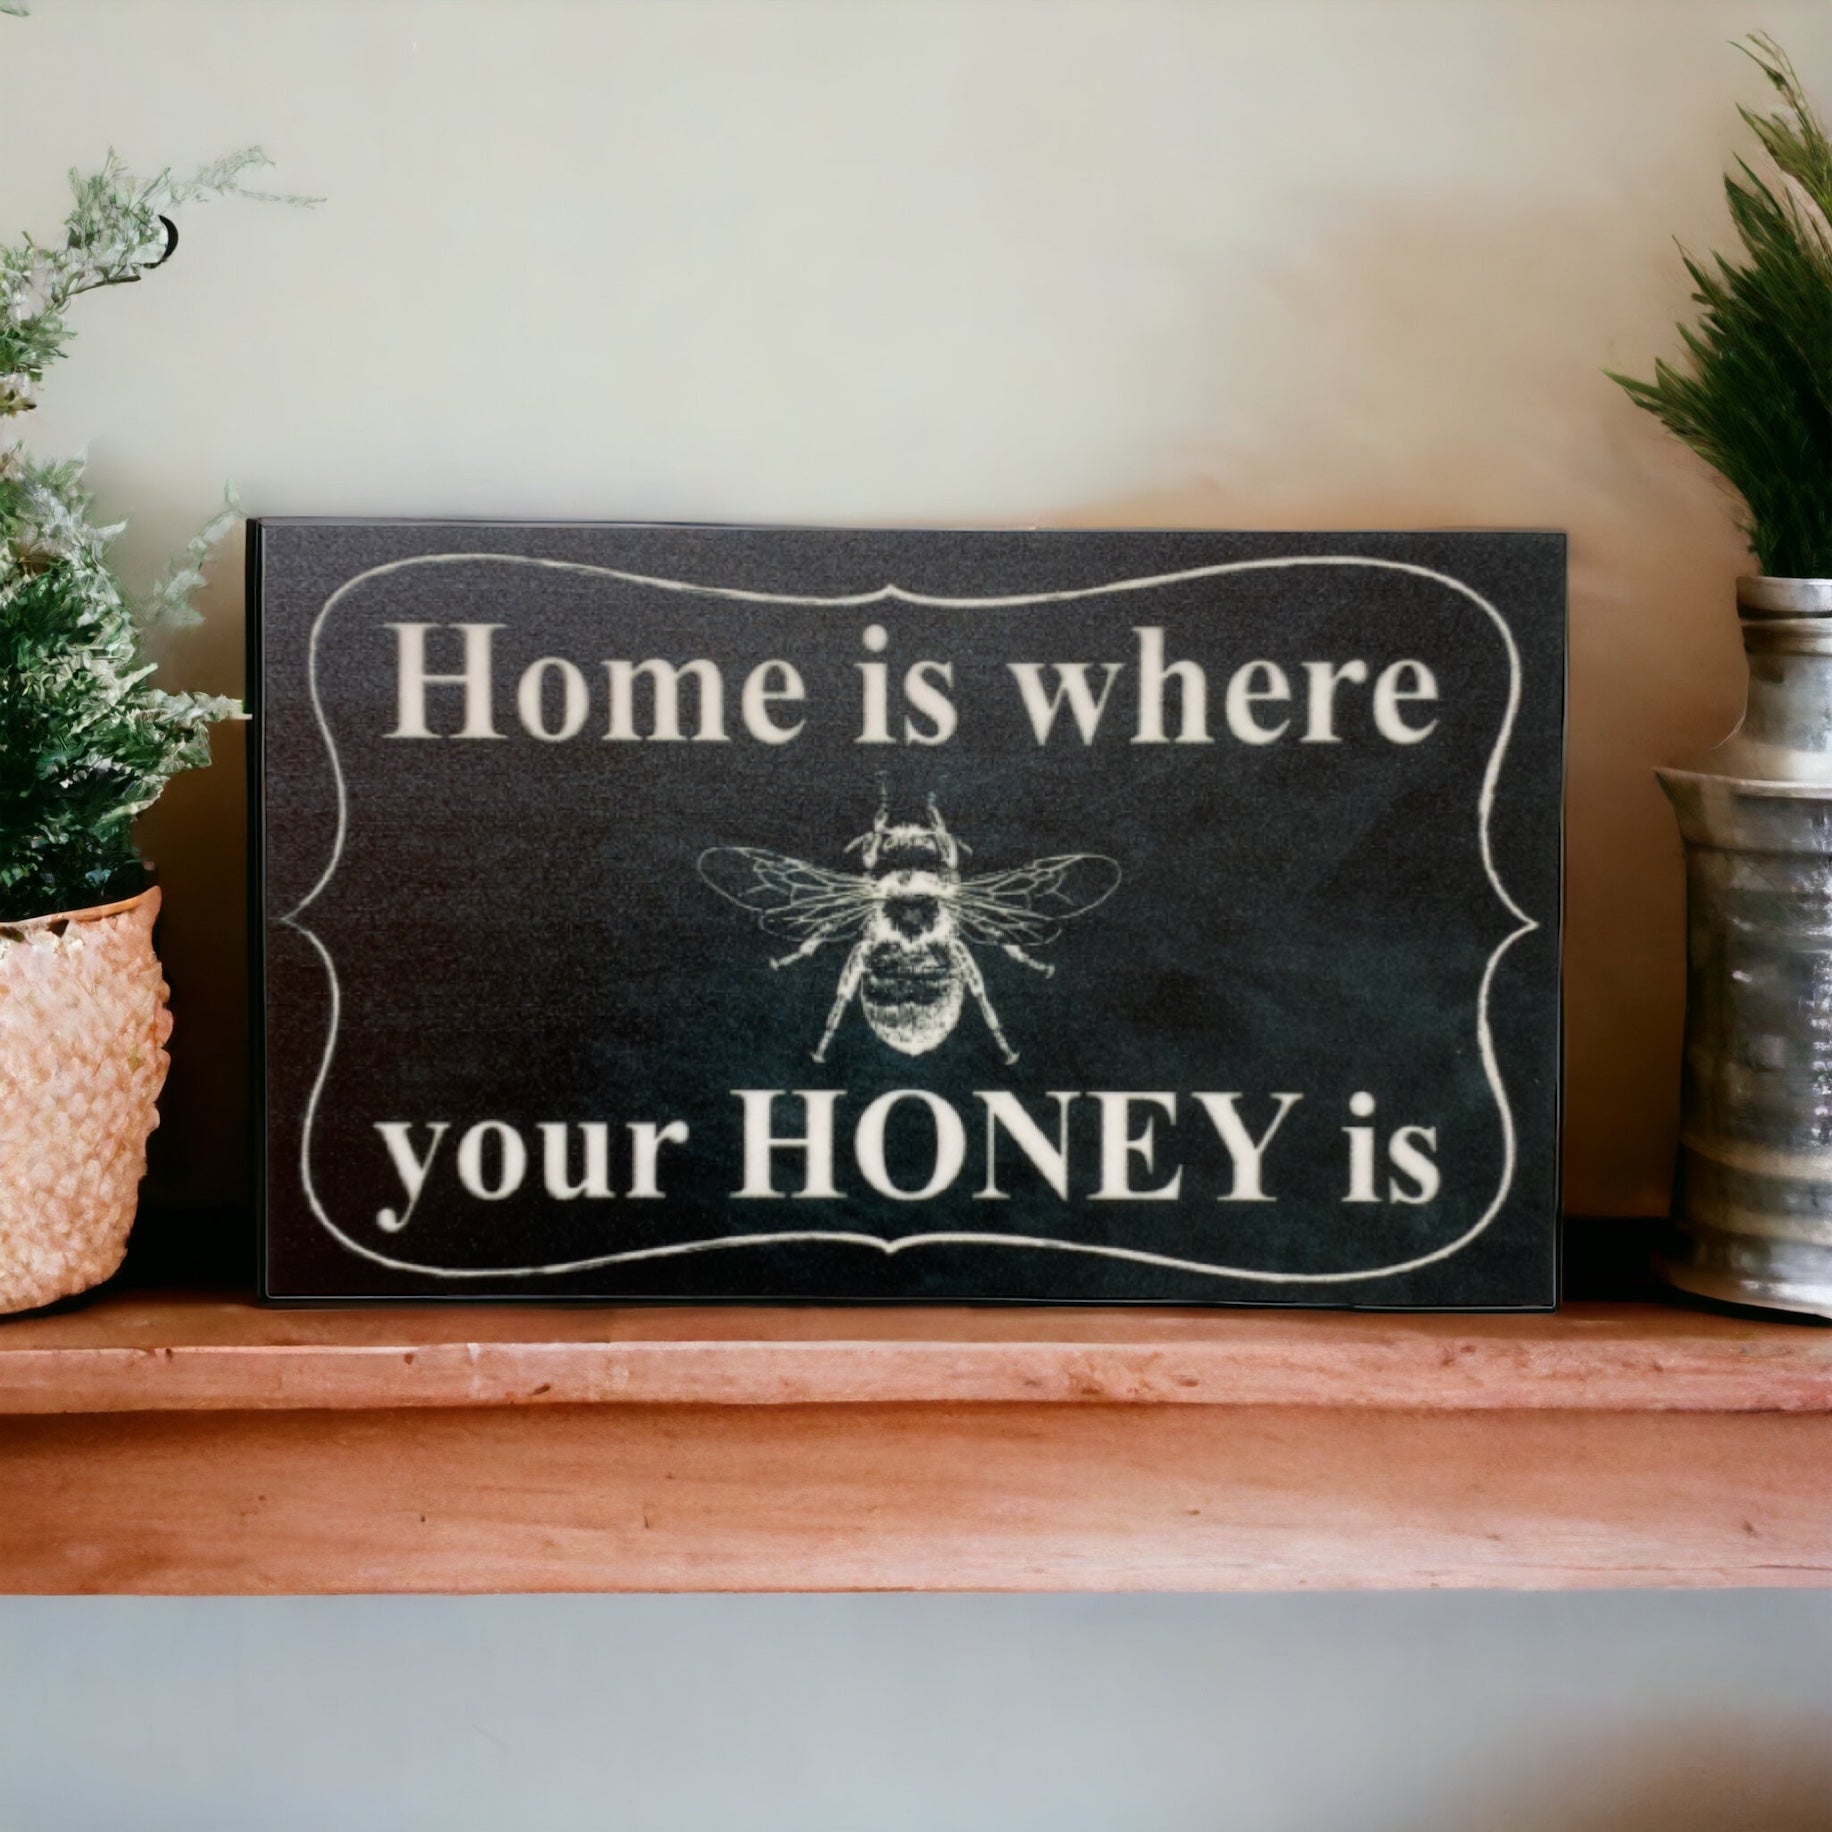 Home Where Your Honey Is Vintage Sign - The Renmy Store Homewares & Gifts 